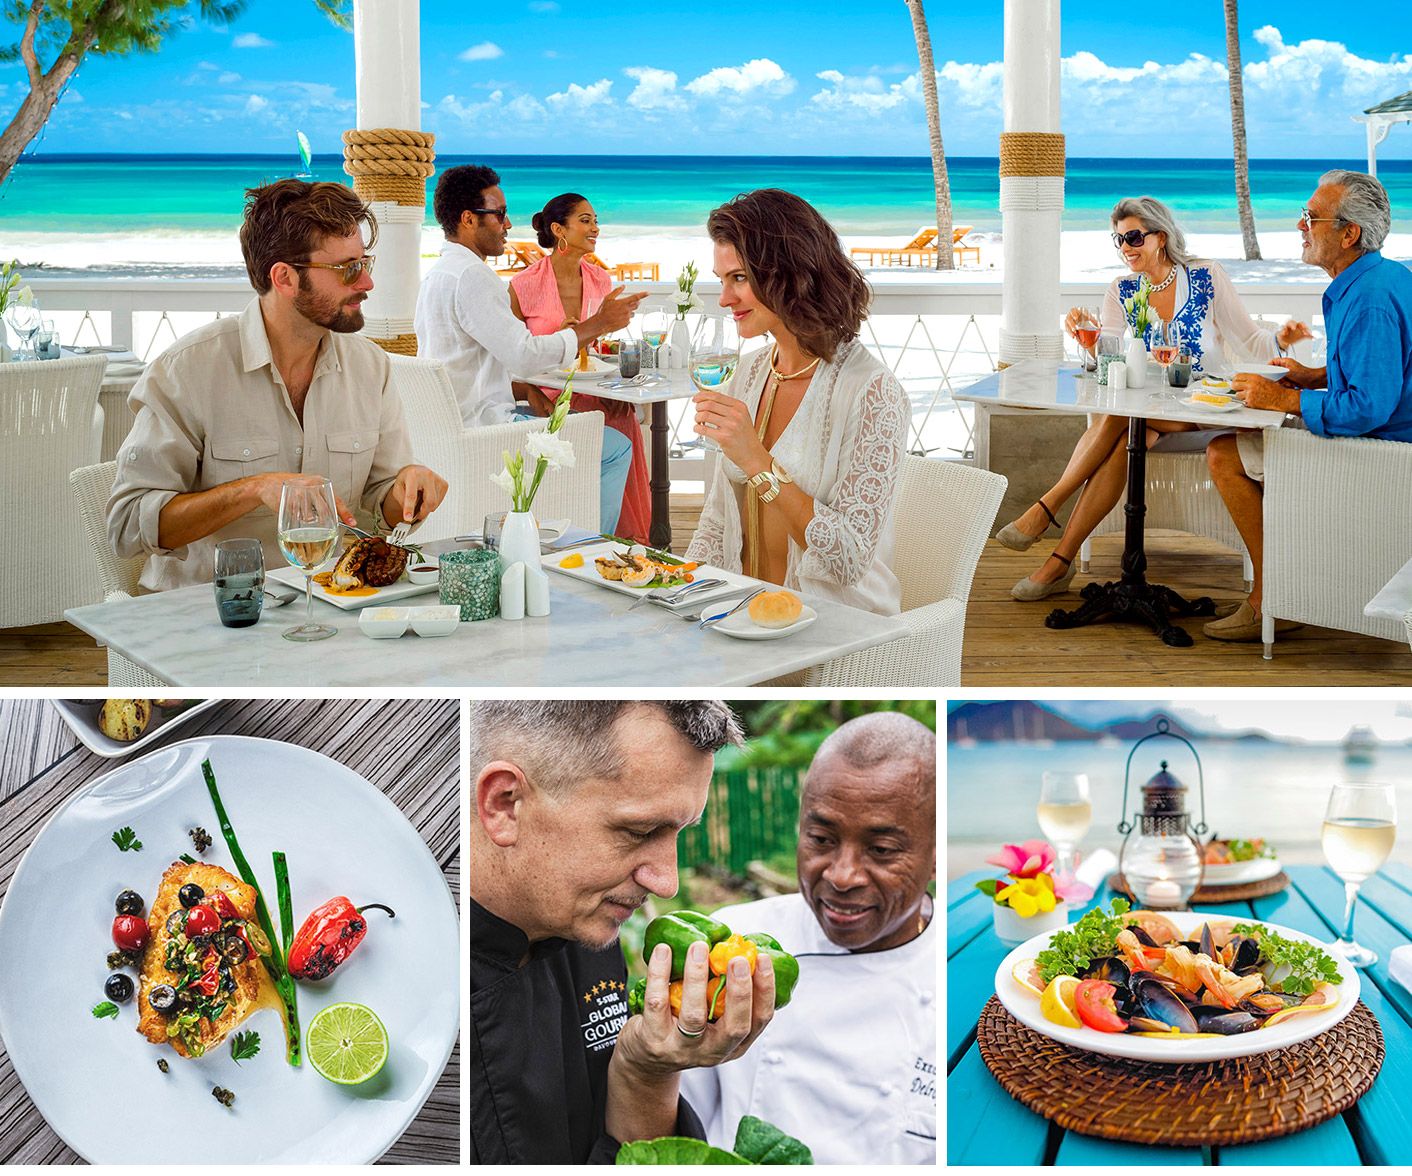 Food at Sandals all-inclusive resorts